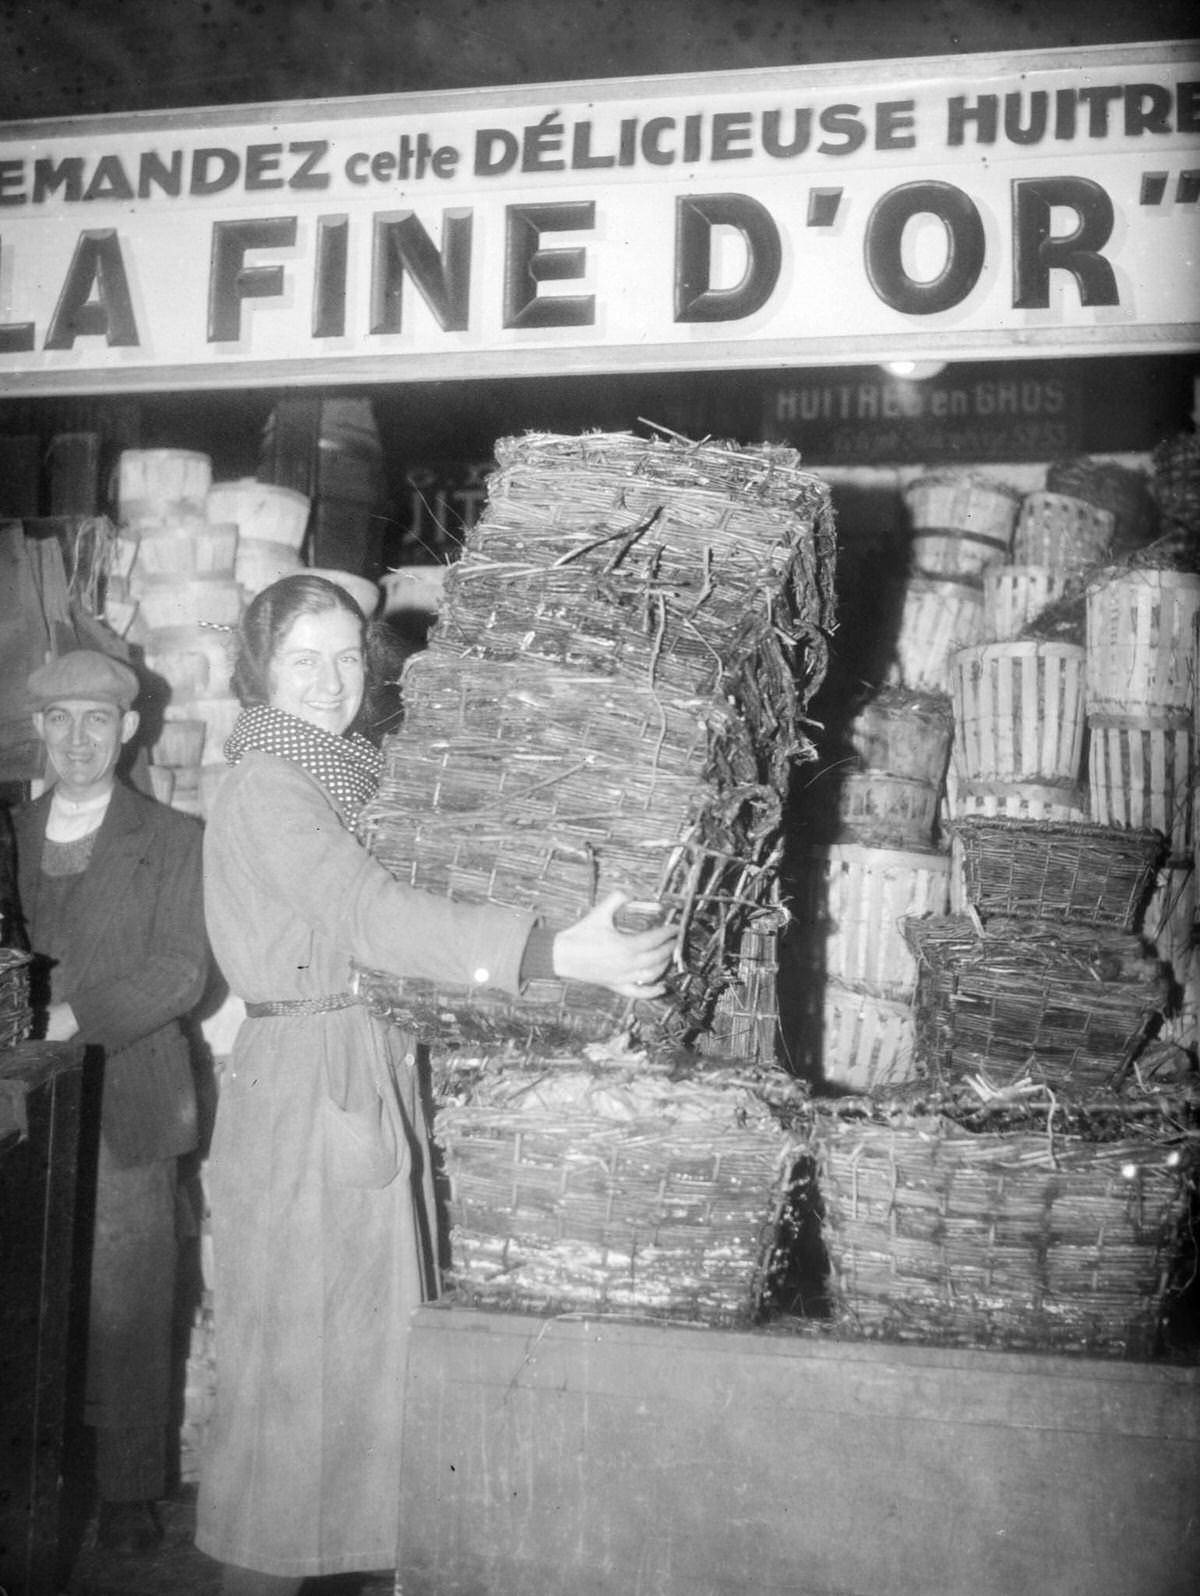 Employee setting up a large shipment of oyster baskets at Les Halles in Paris, France, on December 22, 1934.